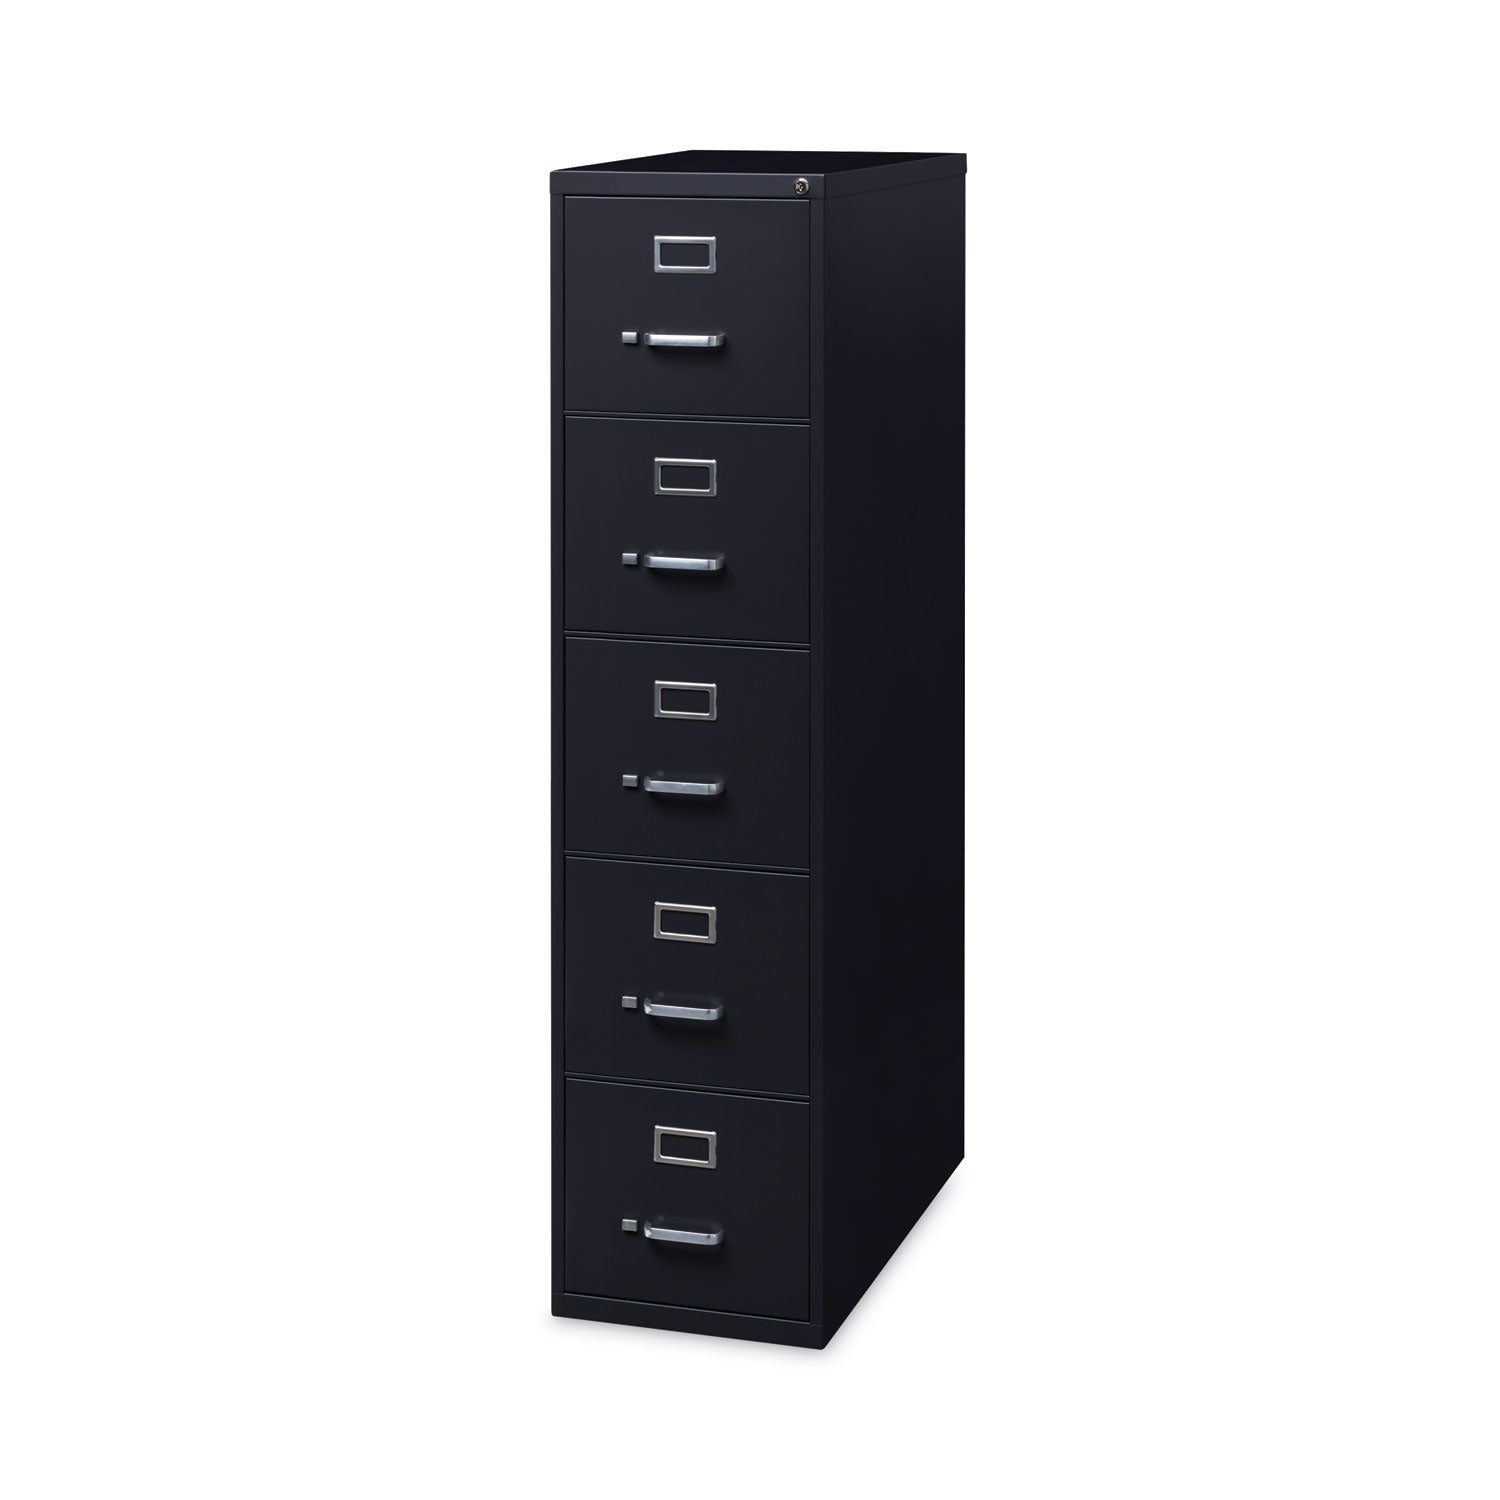 vertical-letter-file-cabinet-5-letter-size-file-drawers-black-15-x-265-x-6137_hid17778 - 4